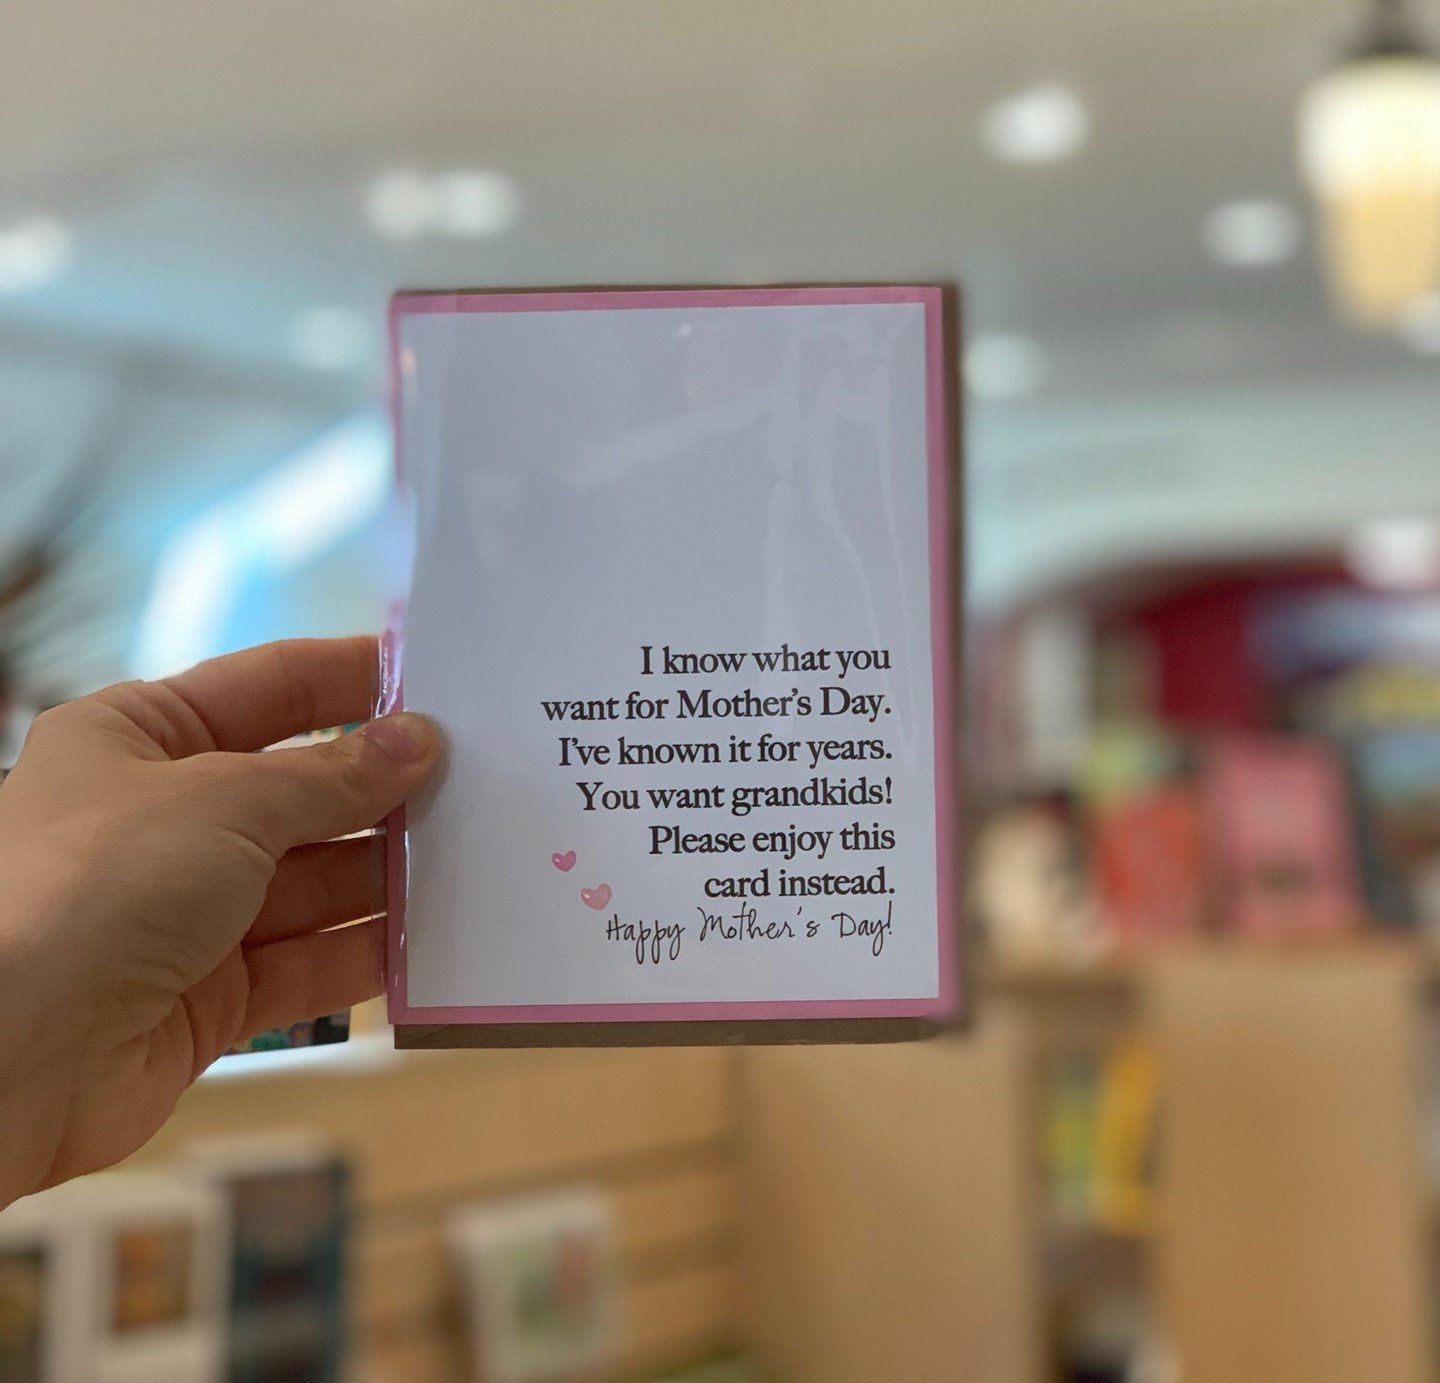 Nothing says, &quot;I love you, Mom!&quot; like a good laugh does. We're stocked up on hilarious Muddy Mouth Mother's Day cards that your mom will love...✨

...probably. 

We can't be sure. 

Purchase at you own discretion. 😉

(swipe to the last one